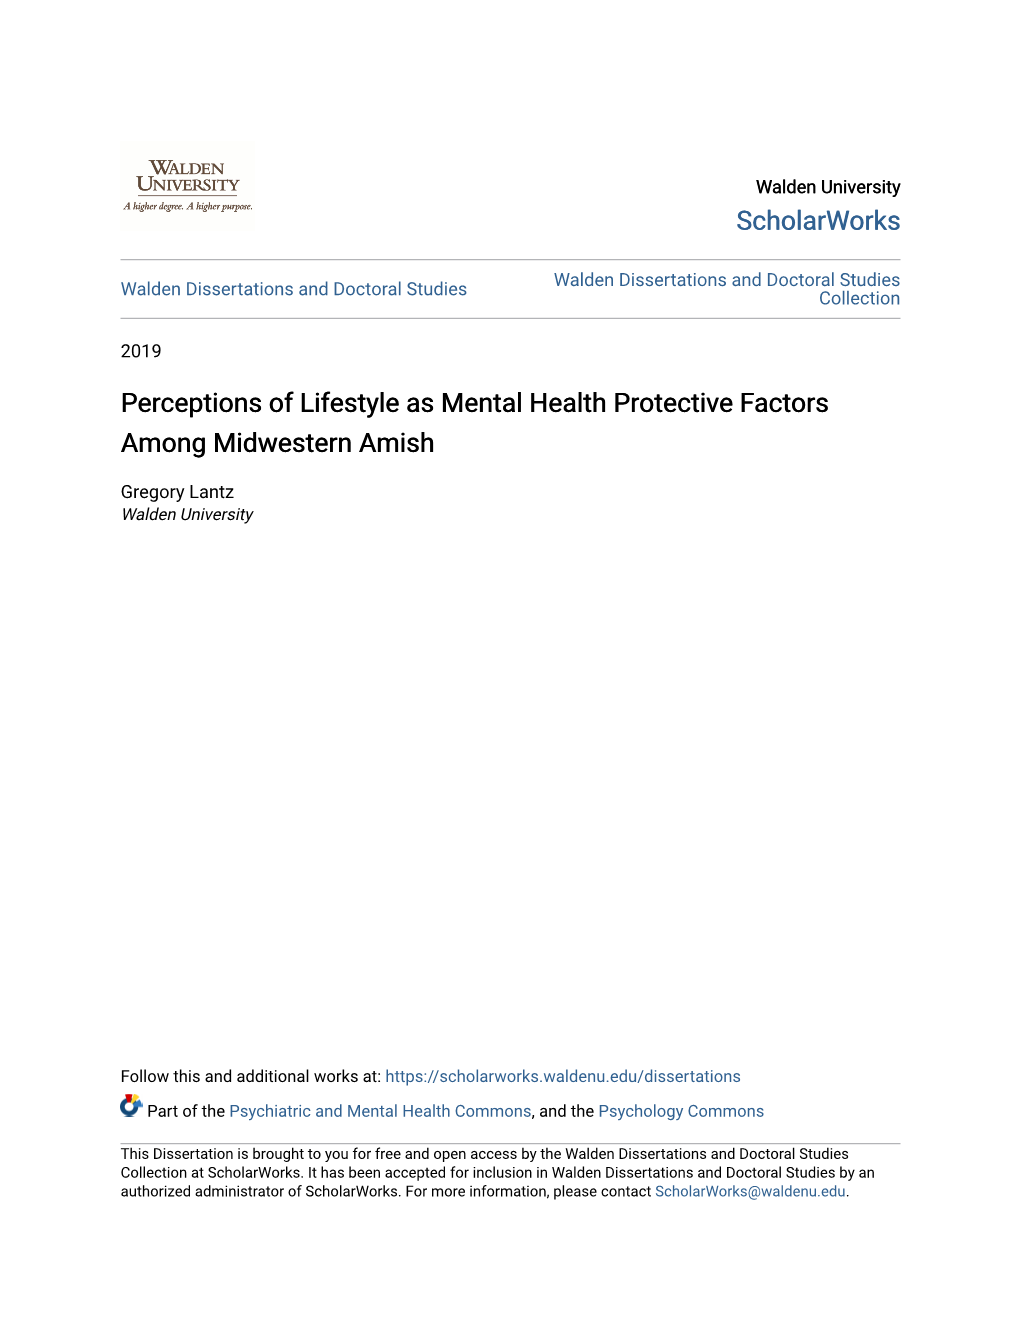 Perceptions of Lifestyle As Mental Health Protective Factors Among Midwestern Amish